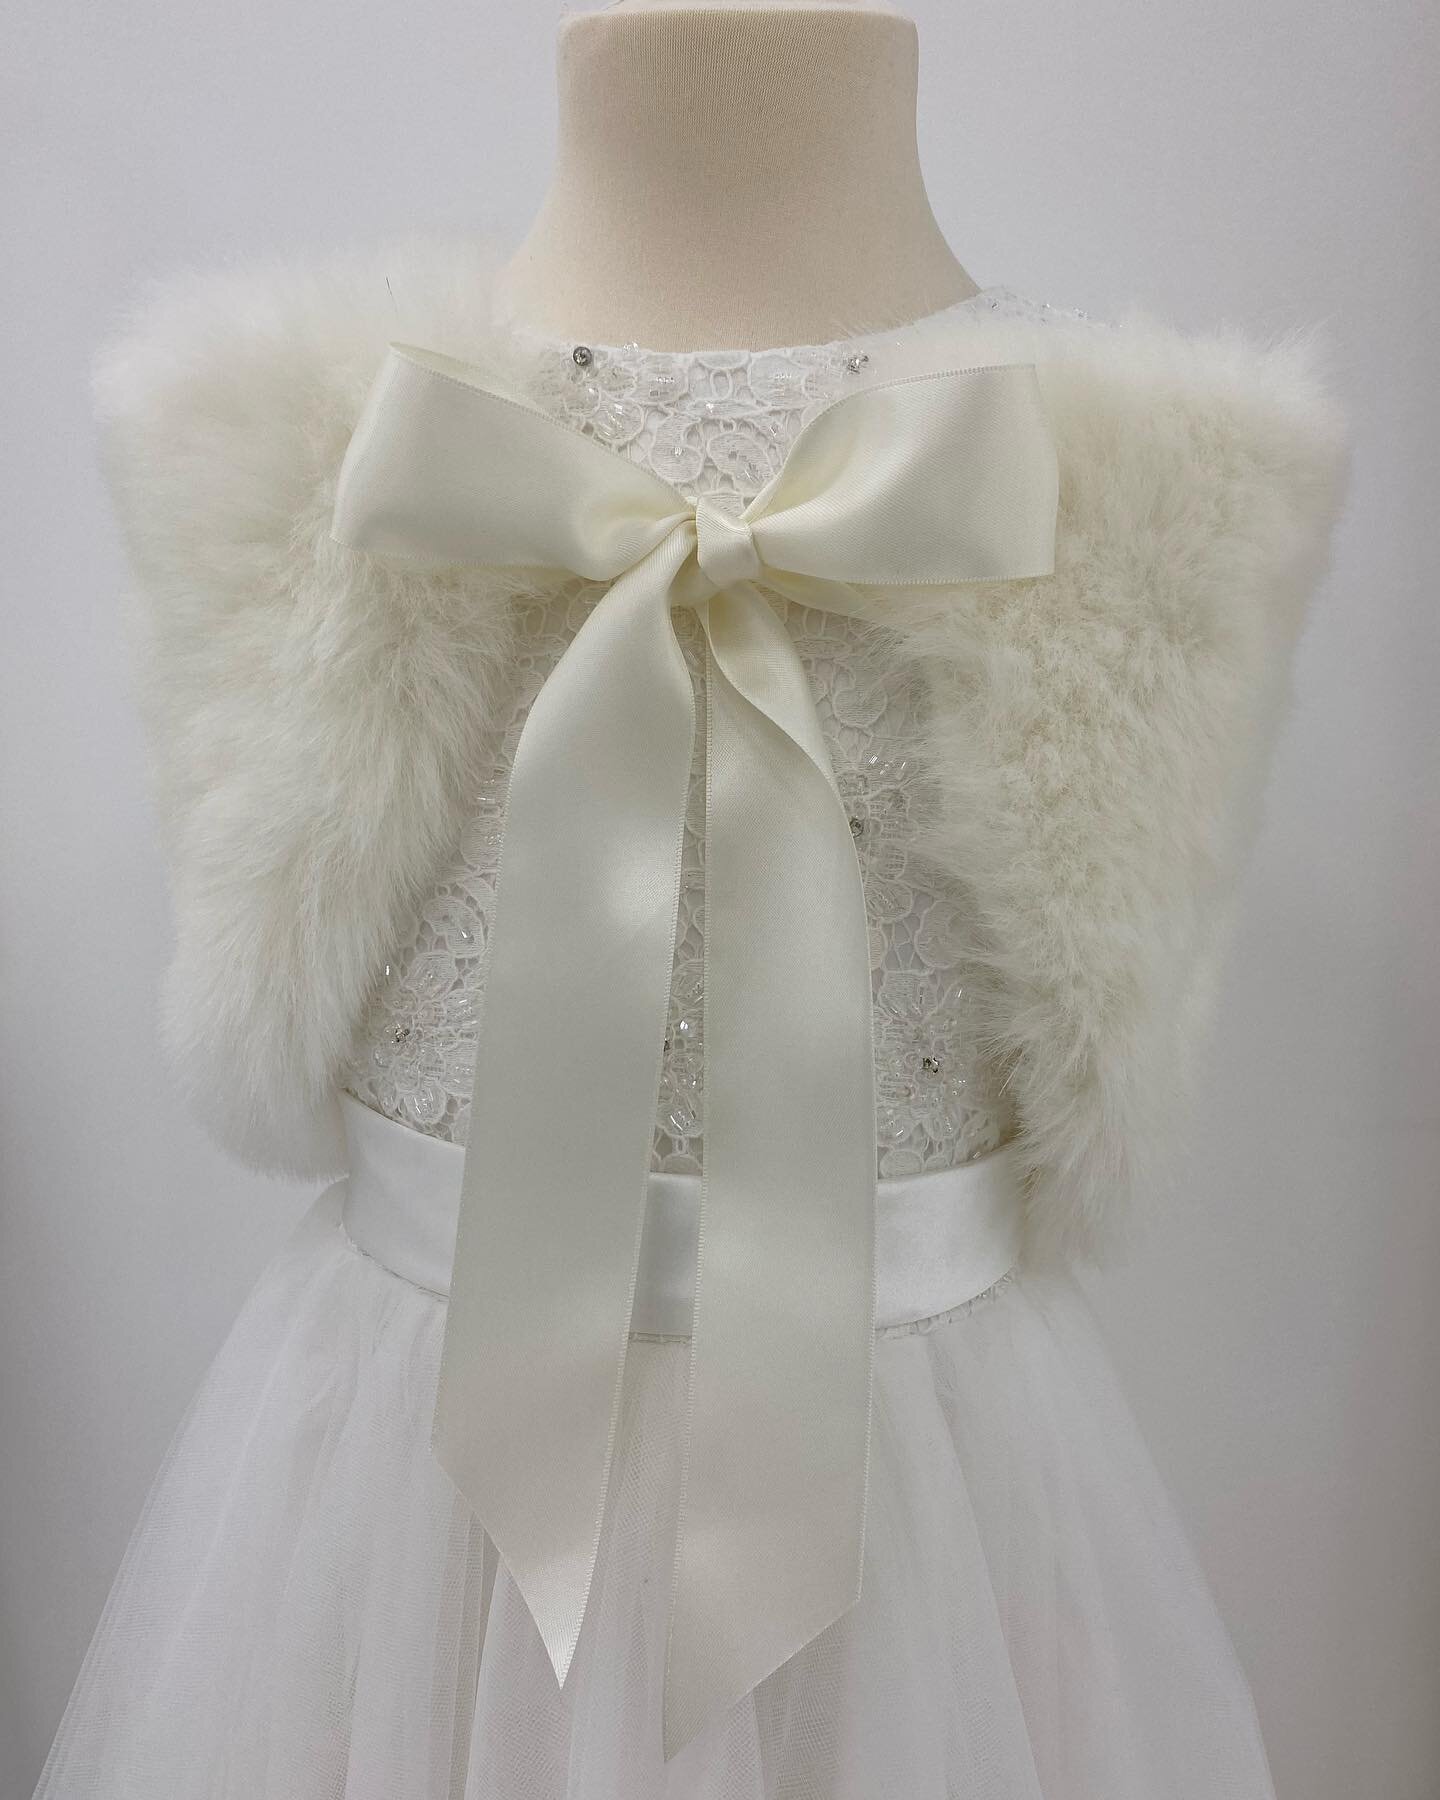 A faux fur wrap fastened with a luxurious satin ribbon. Available in Ivory, Charcoal or Honey. Small is suitable for approximately ages 2-5years, measuring 53cm wide and 22cm deep. Medium, for age 5-8years, measuring 60cm wide and 23cm deep, and larg